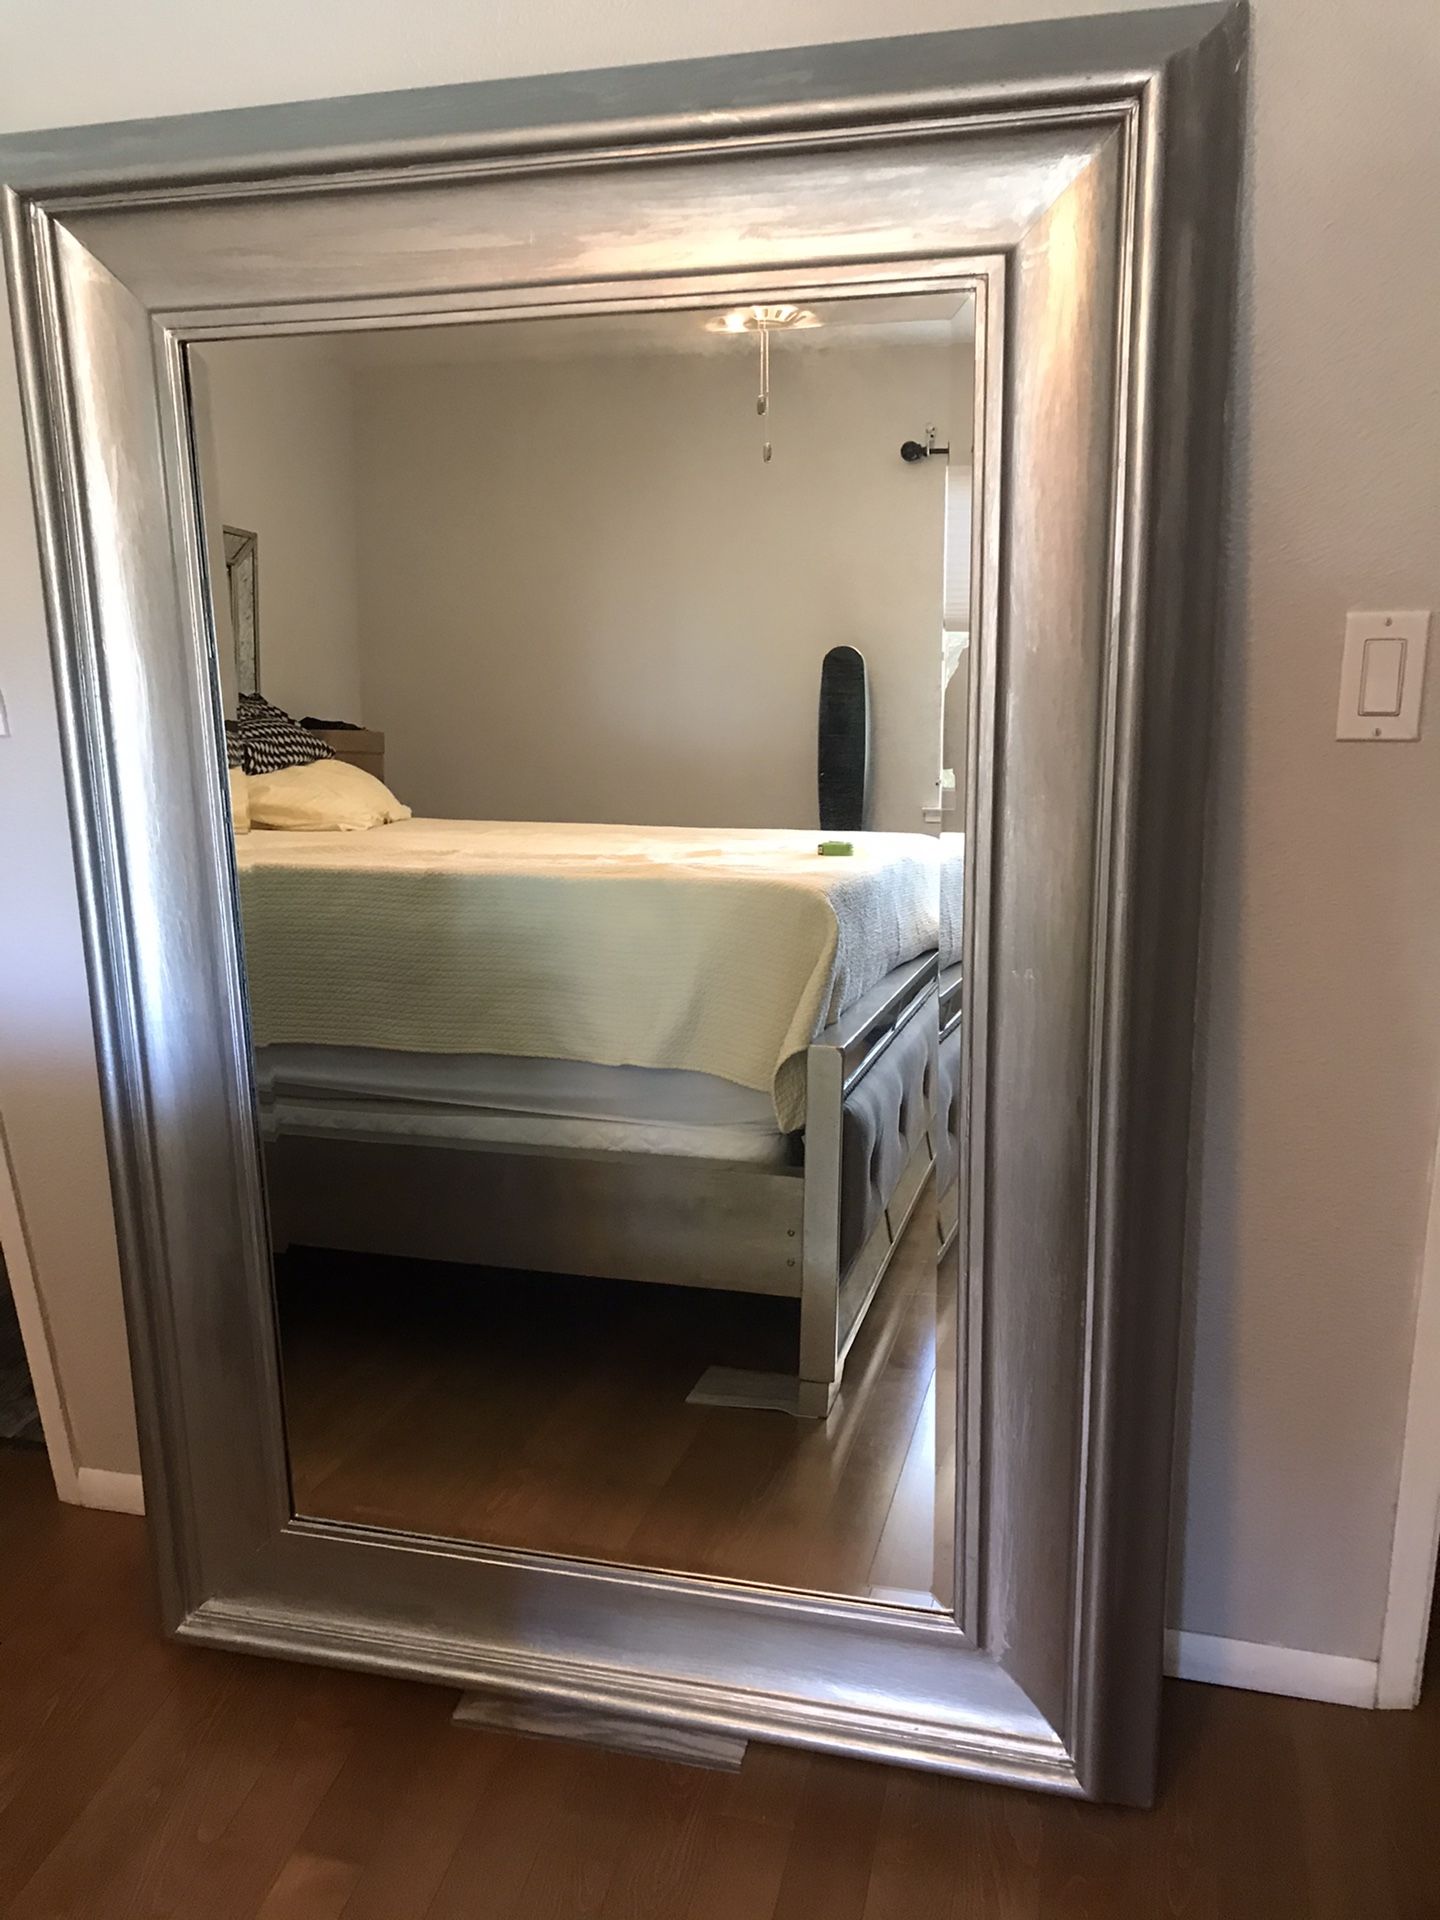 Floor full body mirror in good condition normal wear newly painted silver measurements: 45 inches wide ; 5ft 4inches tall